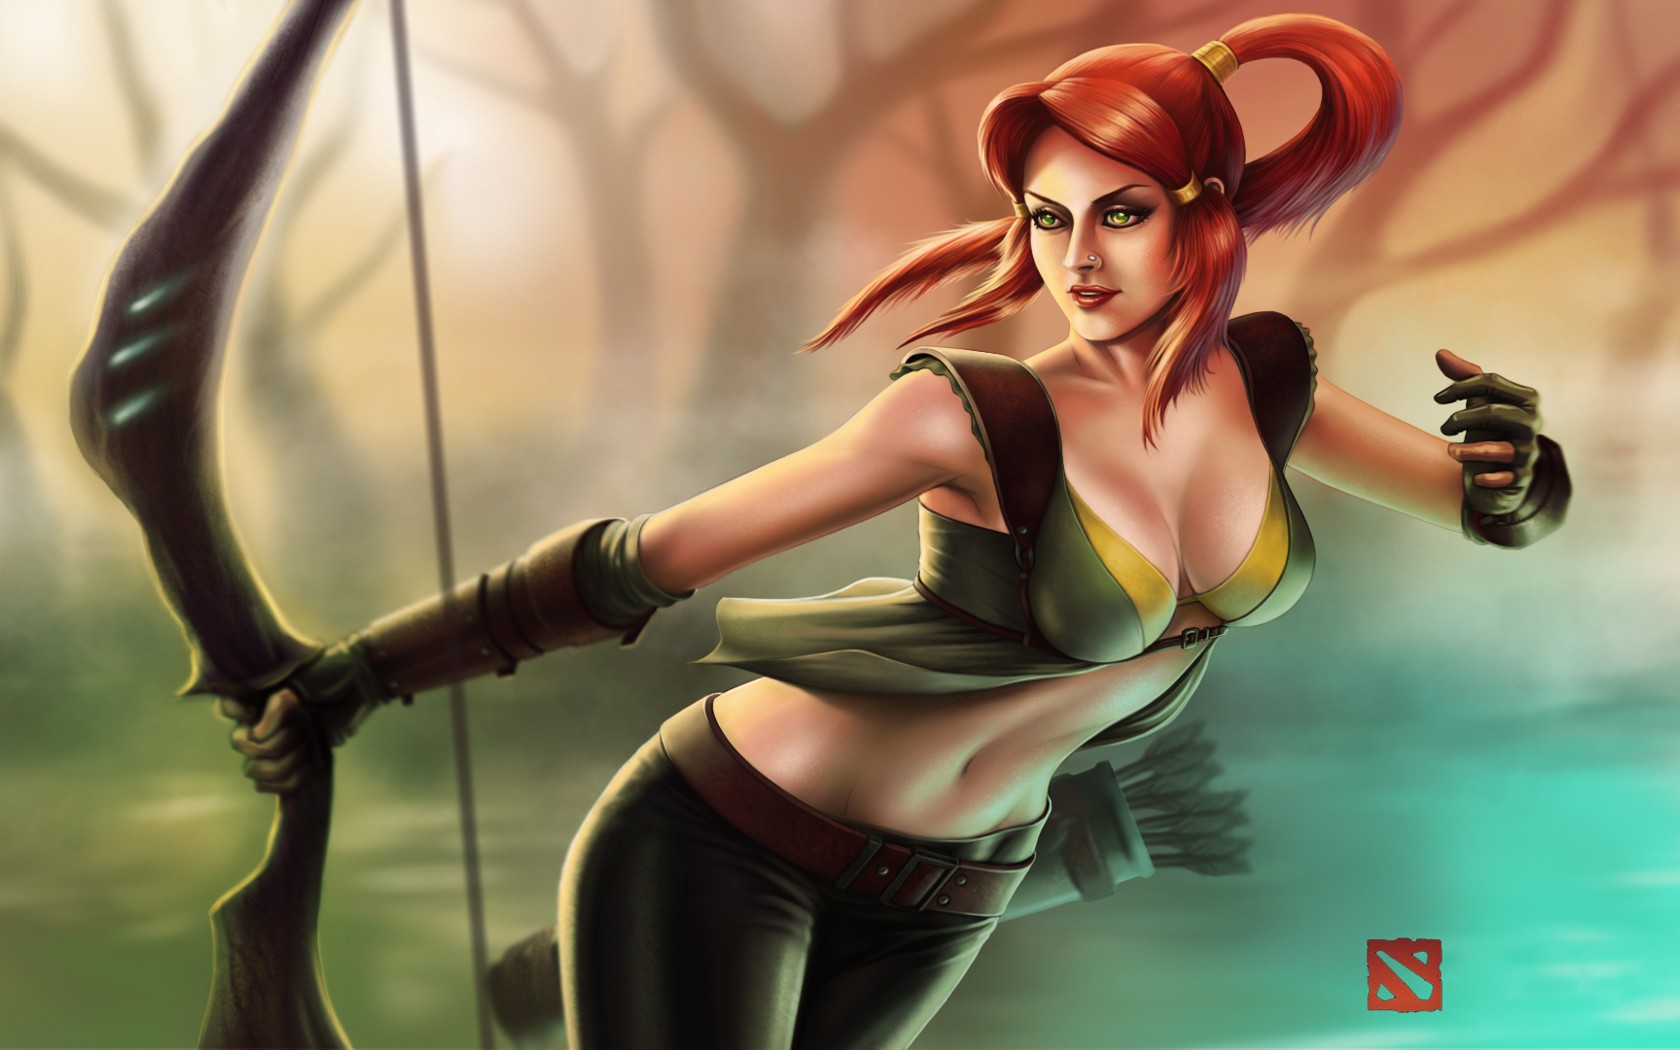 General 1680x1050 Dota 2 Windranger PC gaming video game art video game girls fantasy art fantasy girl redhead boobs big boobs green eyes pierced nose red lipstick archer bow belly